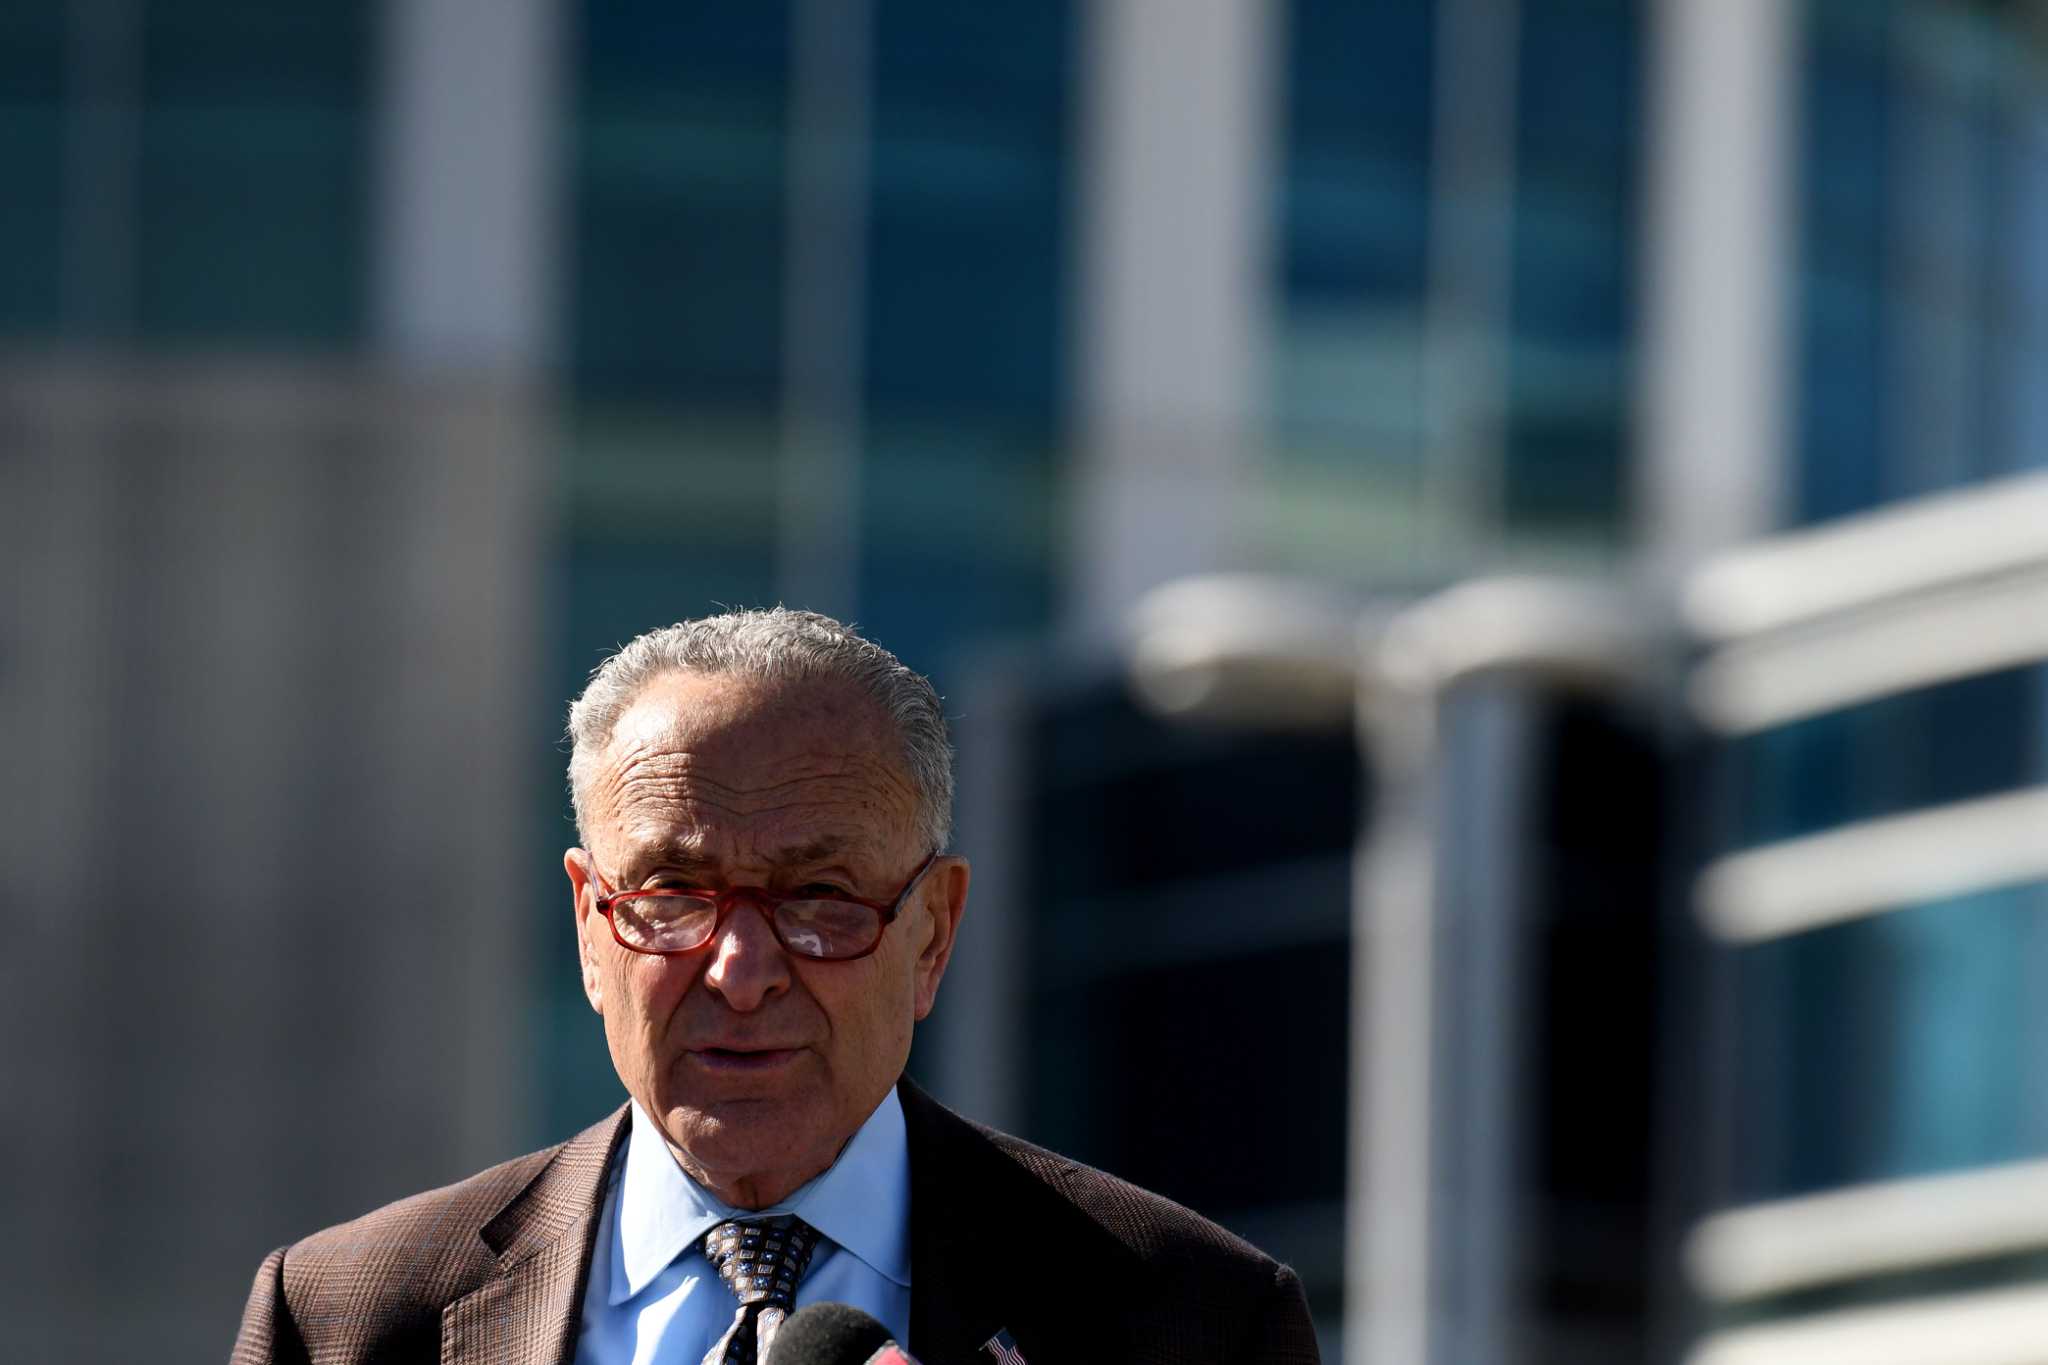 Senate Majority Leader Charles E. Schumer says U.S. must stop flood of Chinese computer chips